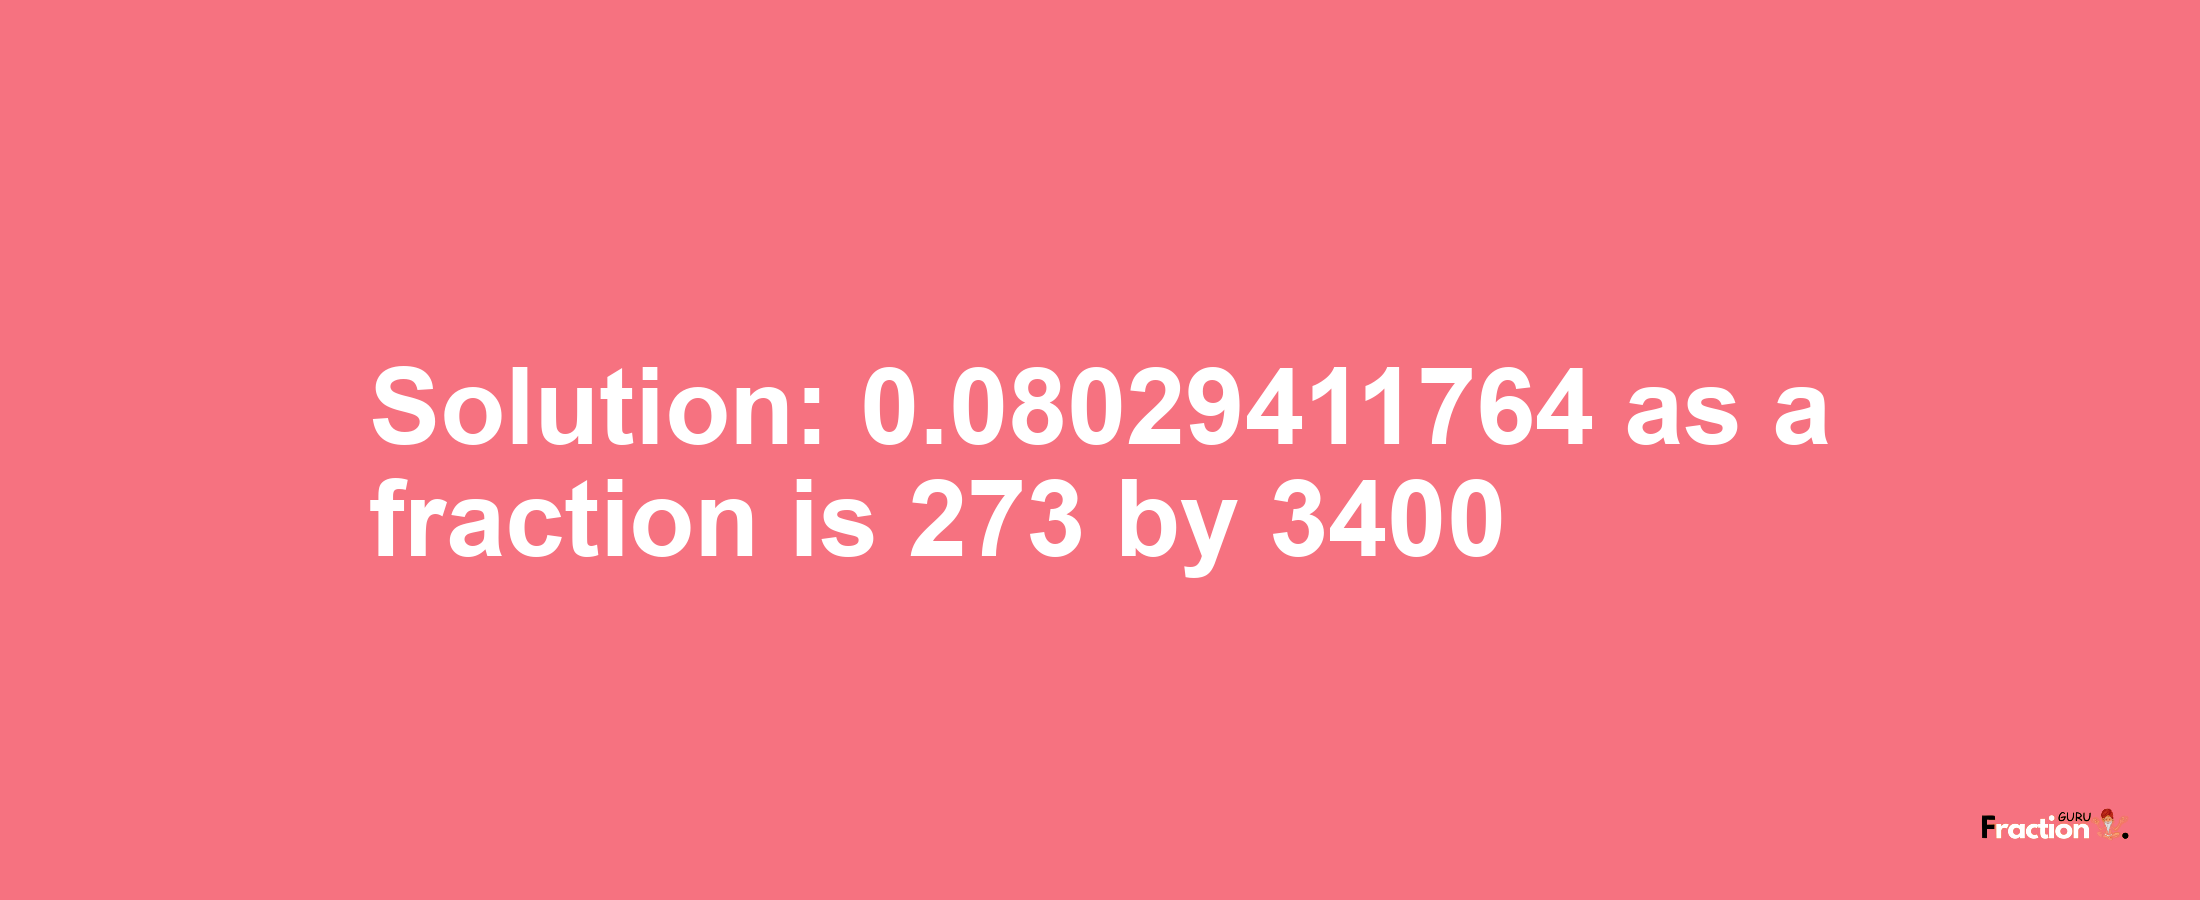 Solution:0.08029411764 as a fraction is 273/3400